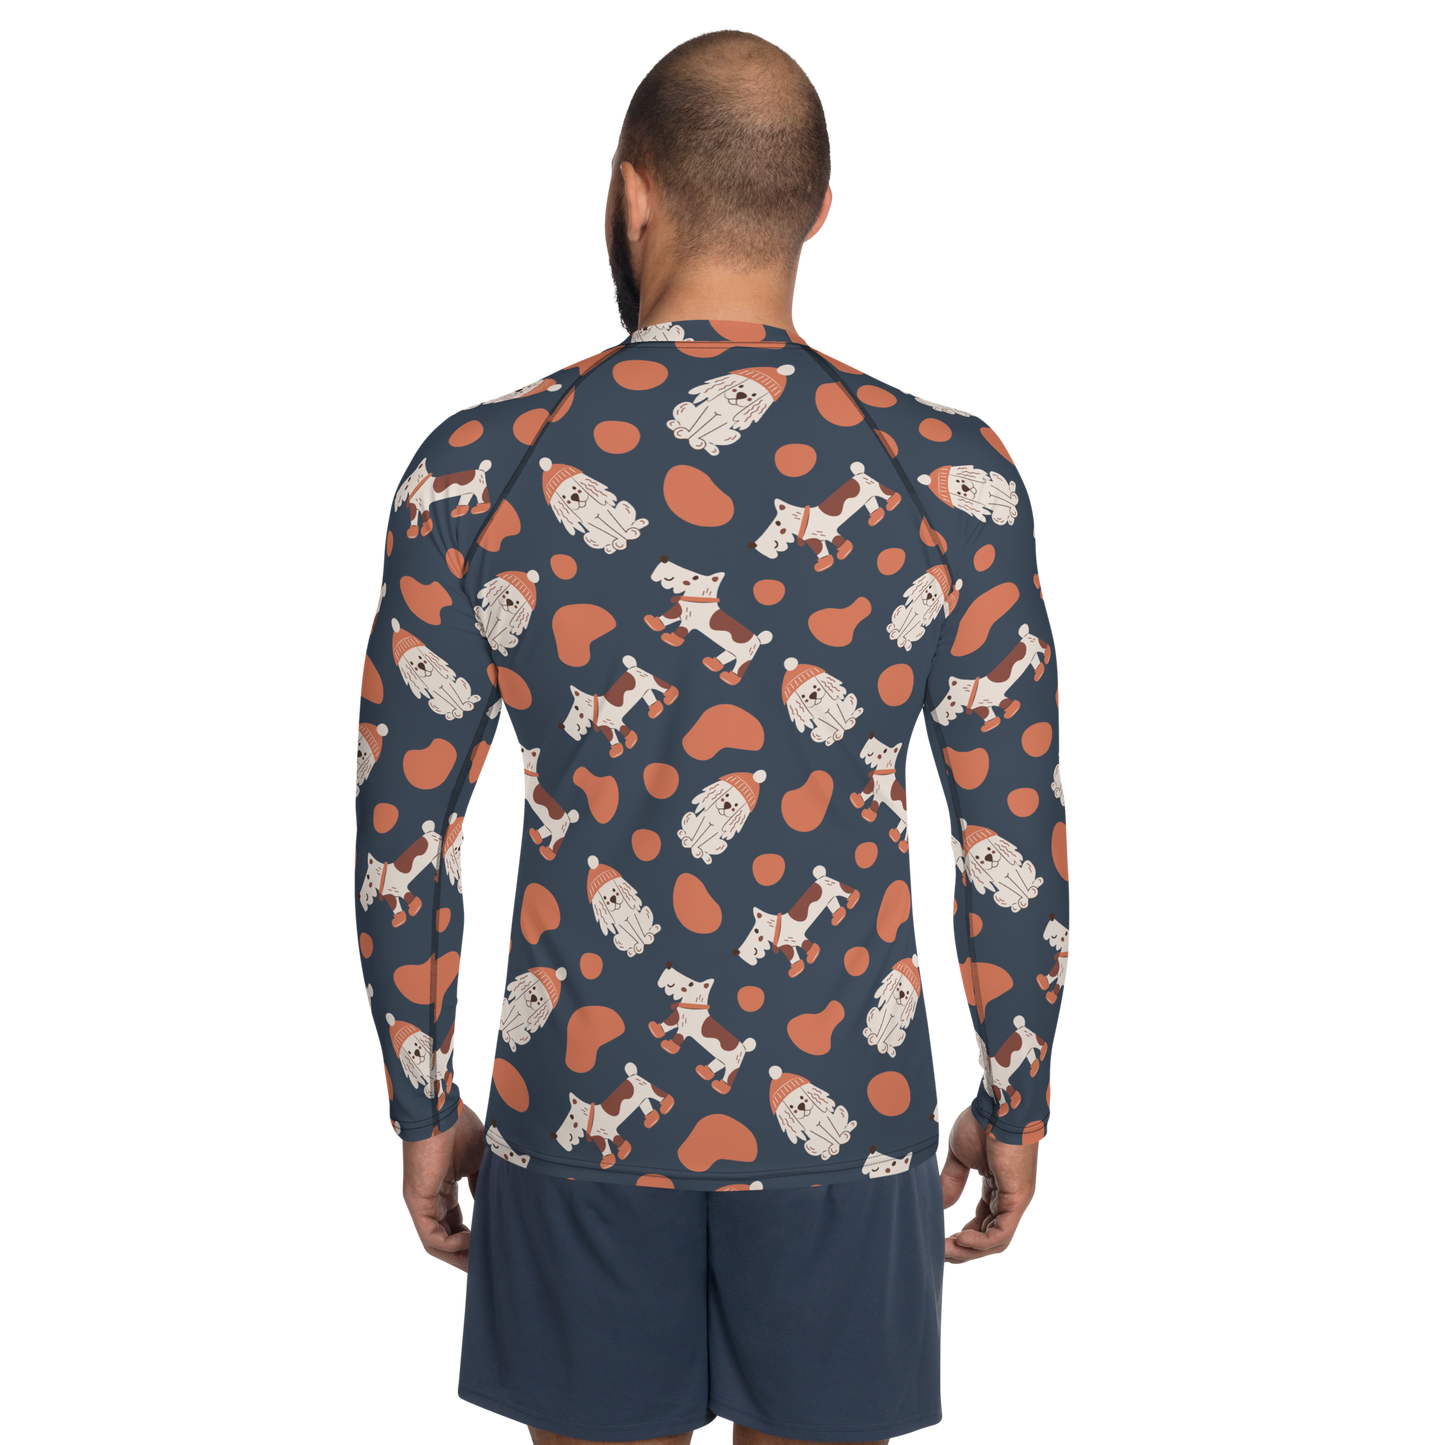 Cozy Dogs | Seamless Patterns | All-Over Print Men's Rash Guard - #5